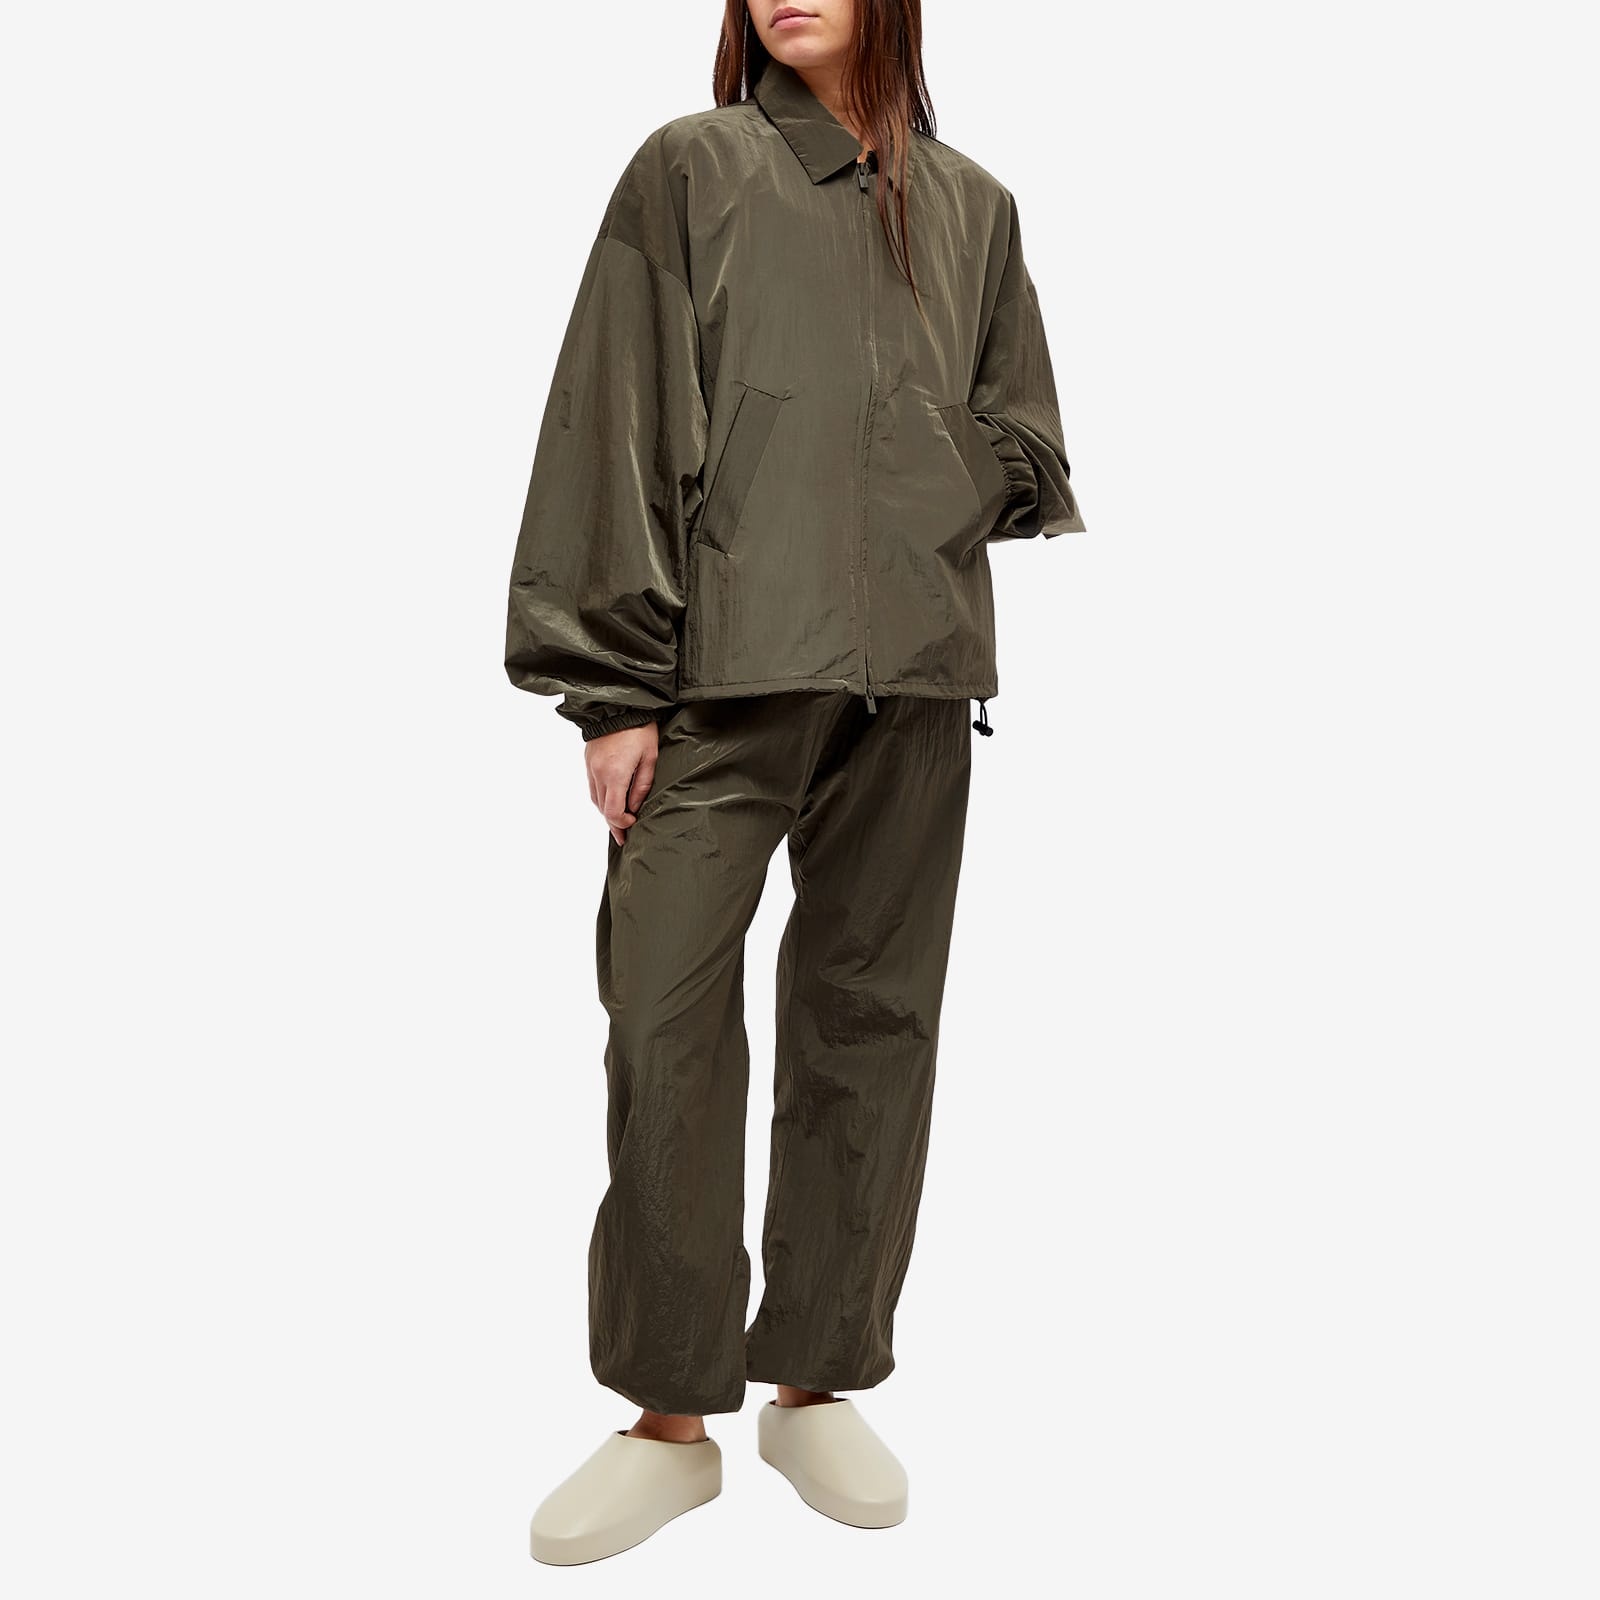 Fear of God ESSENTIALS Shell Bomber Jacket - 4